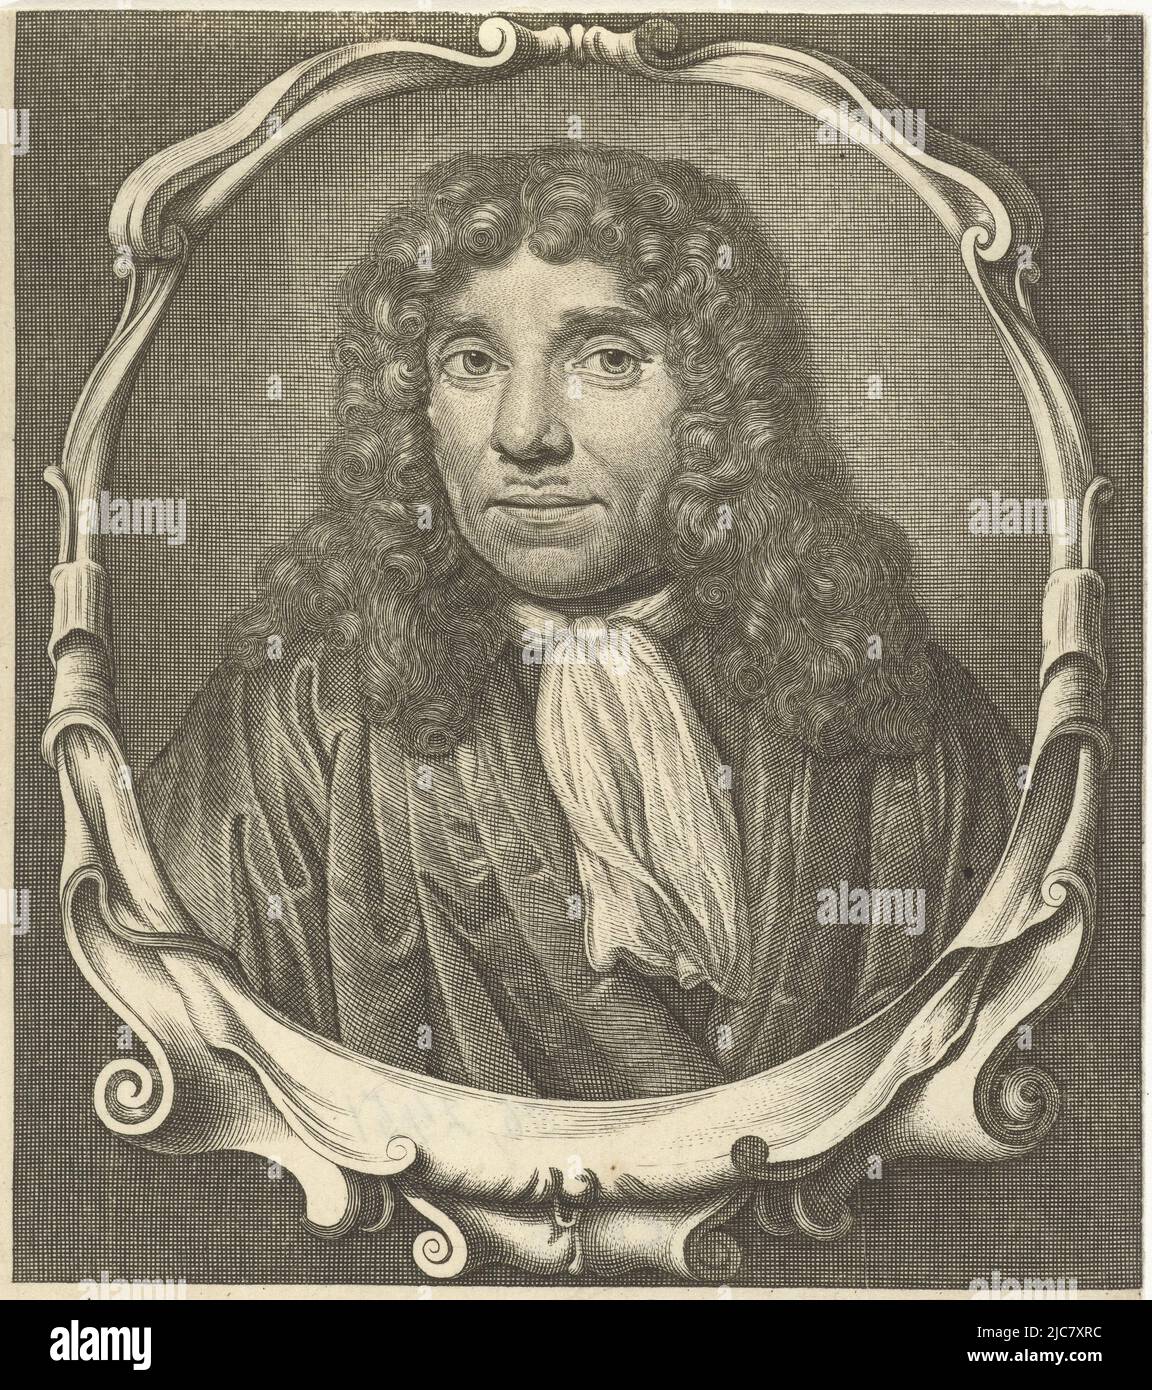 Portrait of Antonie van Leeuwenhoek, bust in oval frame with scroll ornaments, Portrait of Antonie van Leeuwenhoek Antonius a Leeuwenhoek Regiae Societatis Londinensis , print maker: Abraham de Blois, (mentioned on object), after: Jan Verkolje, (mentioned on object), Amsterdam, 1679 - 1717, paper, engraving, h 180 mm × w 140 mm Stock Photo